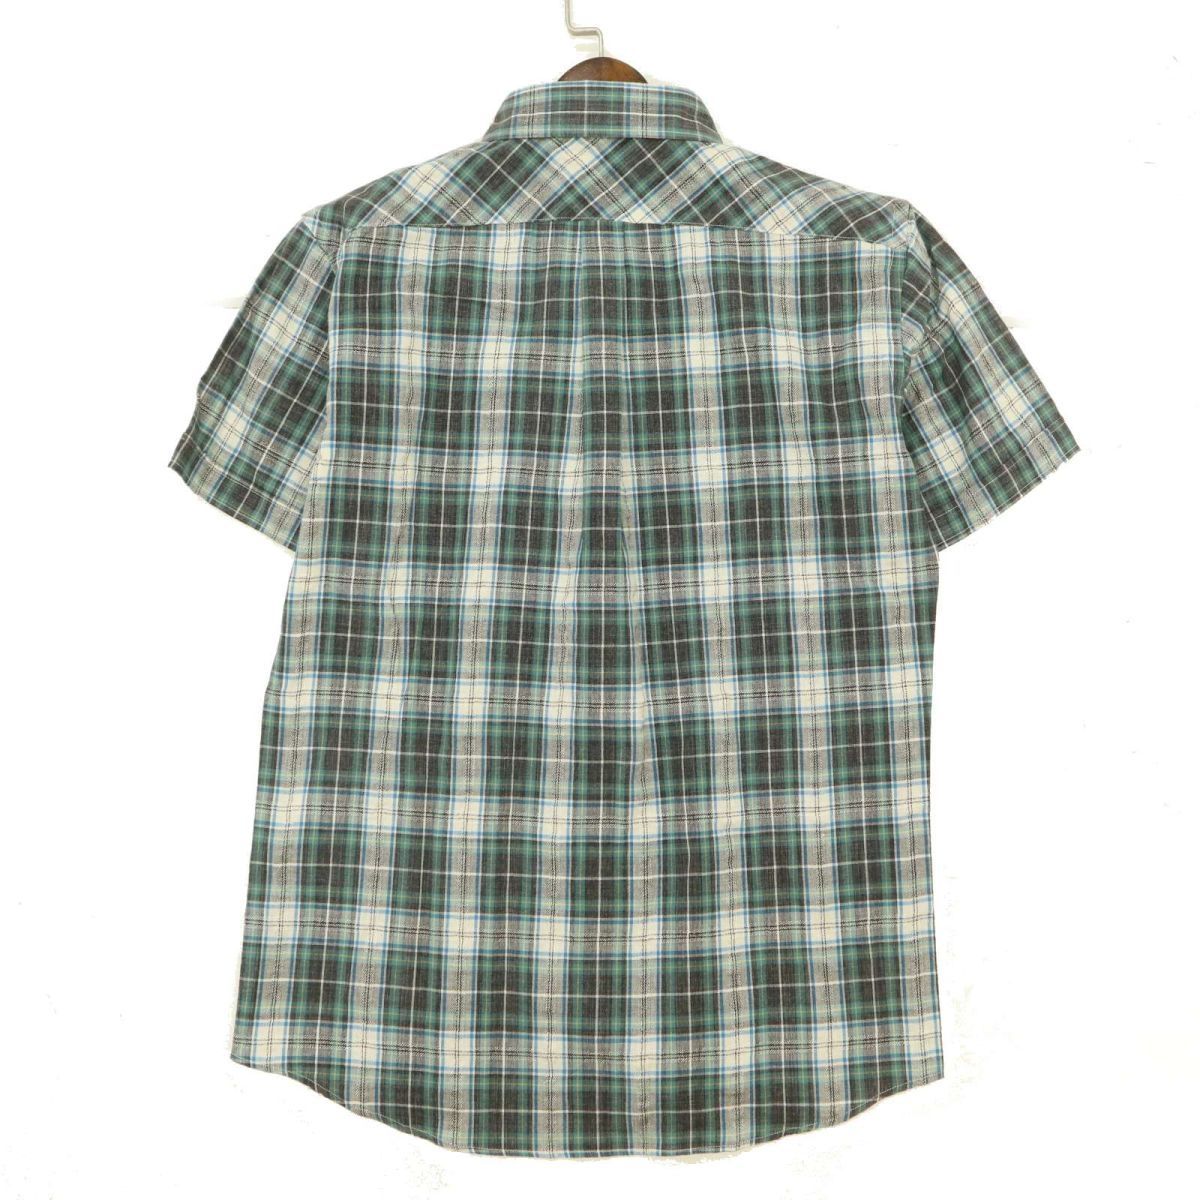 A DAY IN THE LIFE United Arrows spring summer short sleeves check * button down shirt Sz.M men's green made in Japan C3T06343_7#A